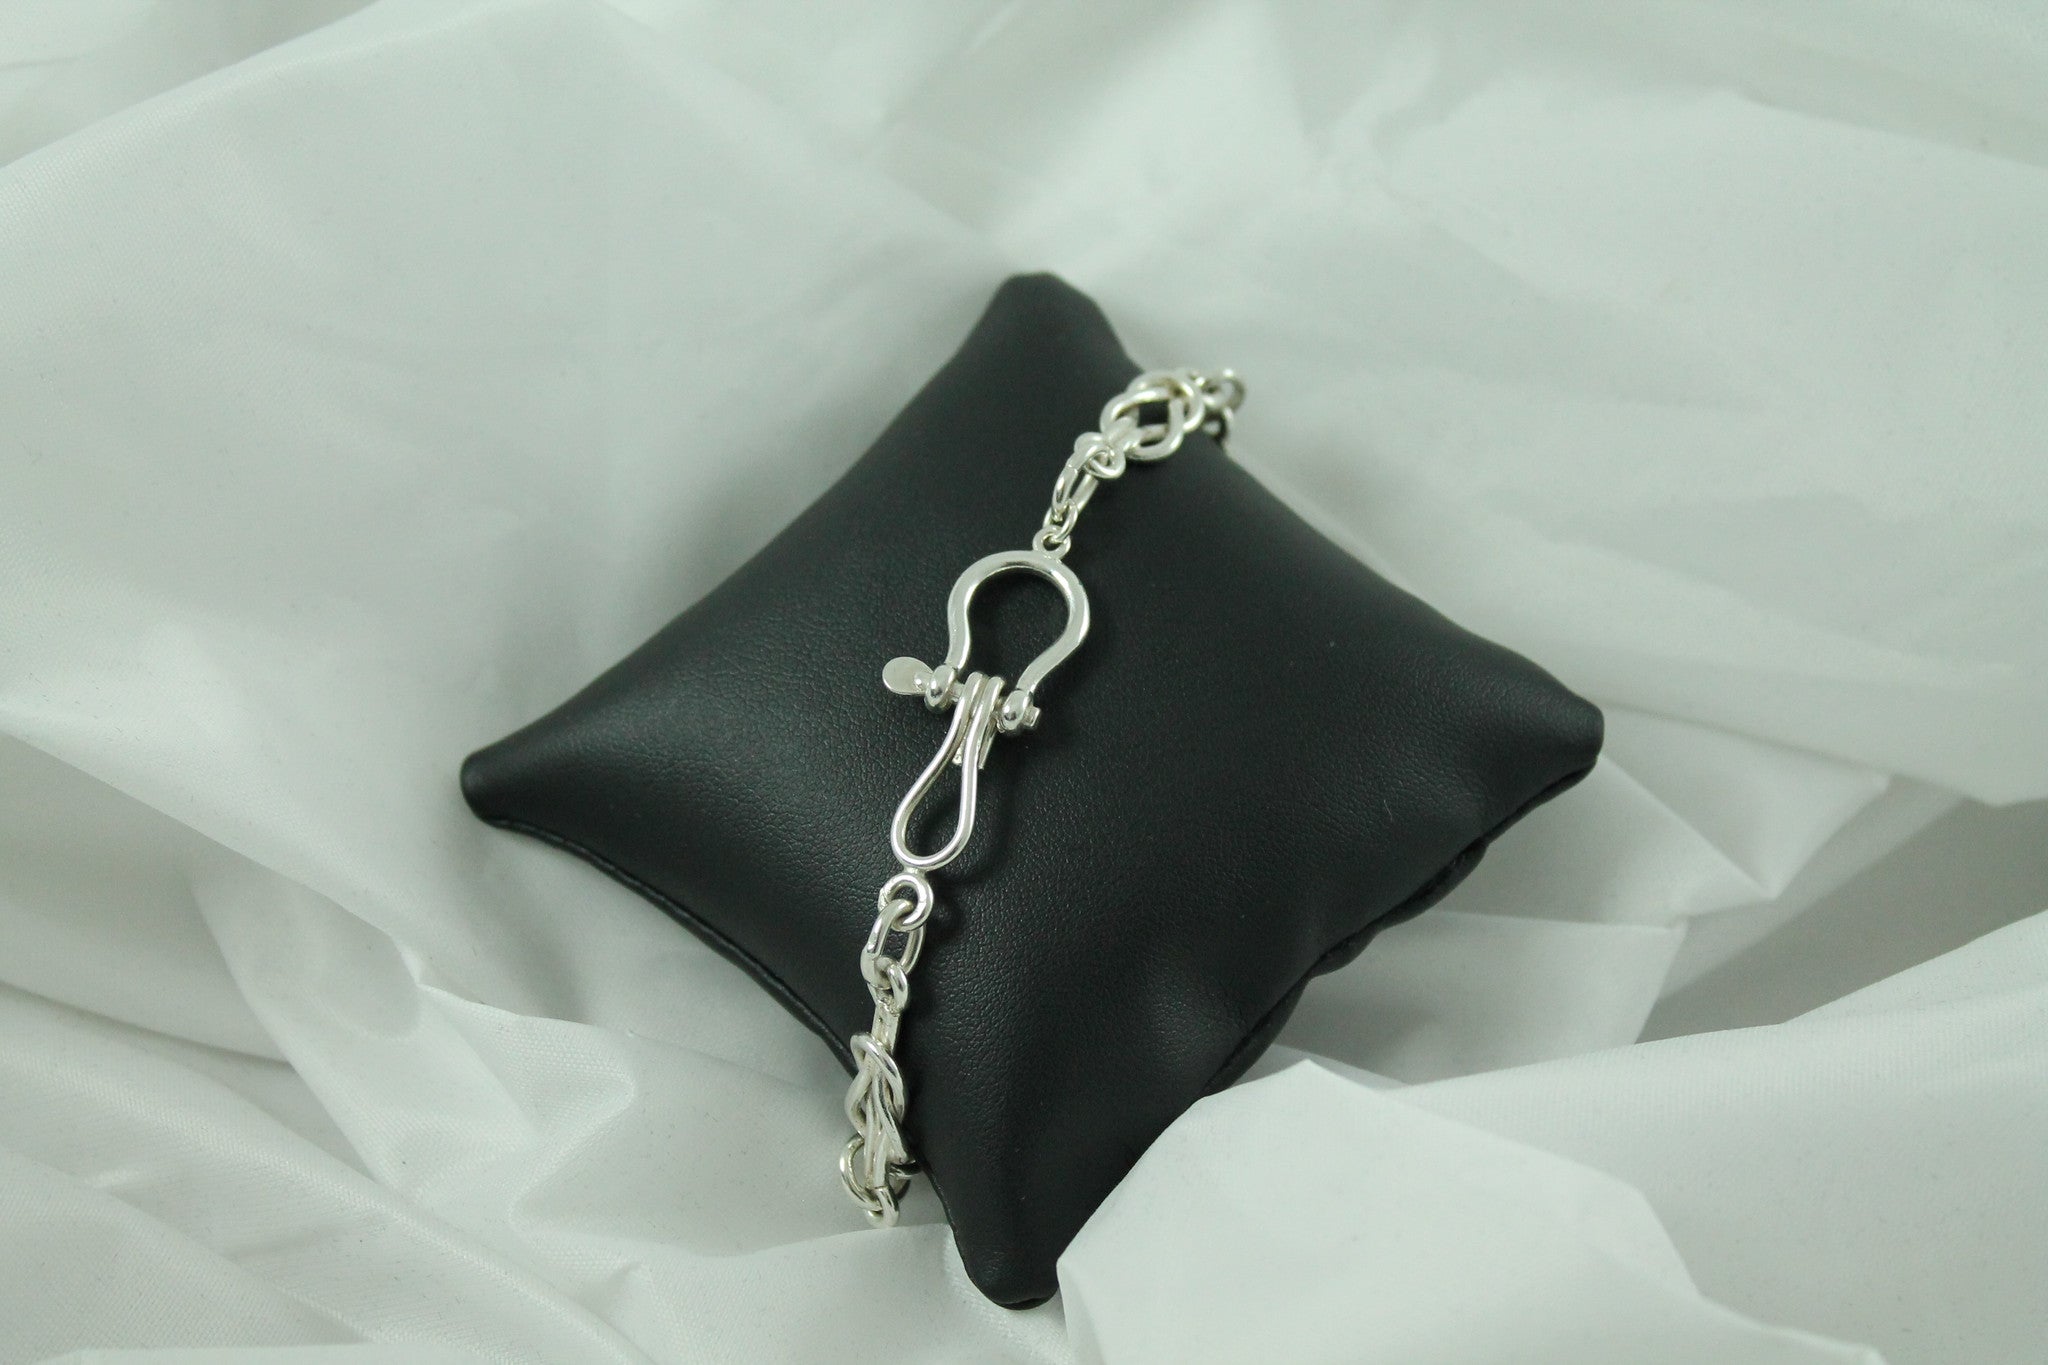 Reef Knot Bracelet with Shackle clasp